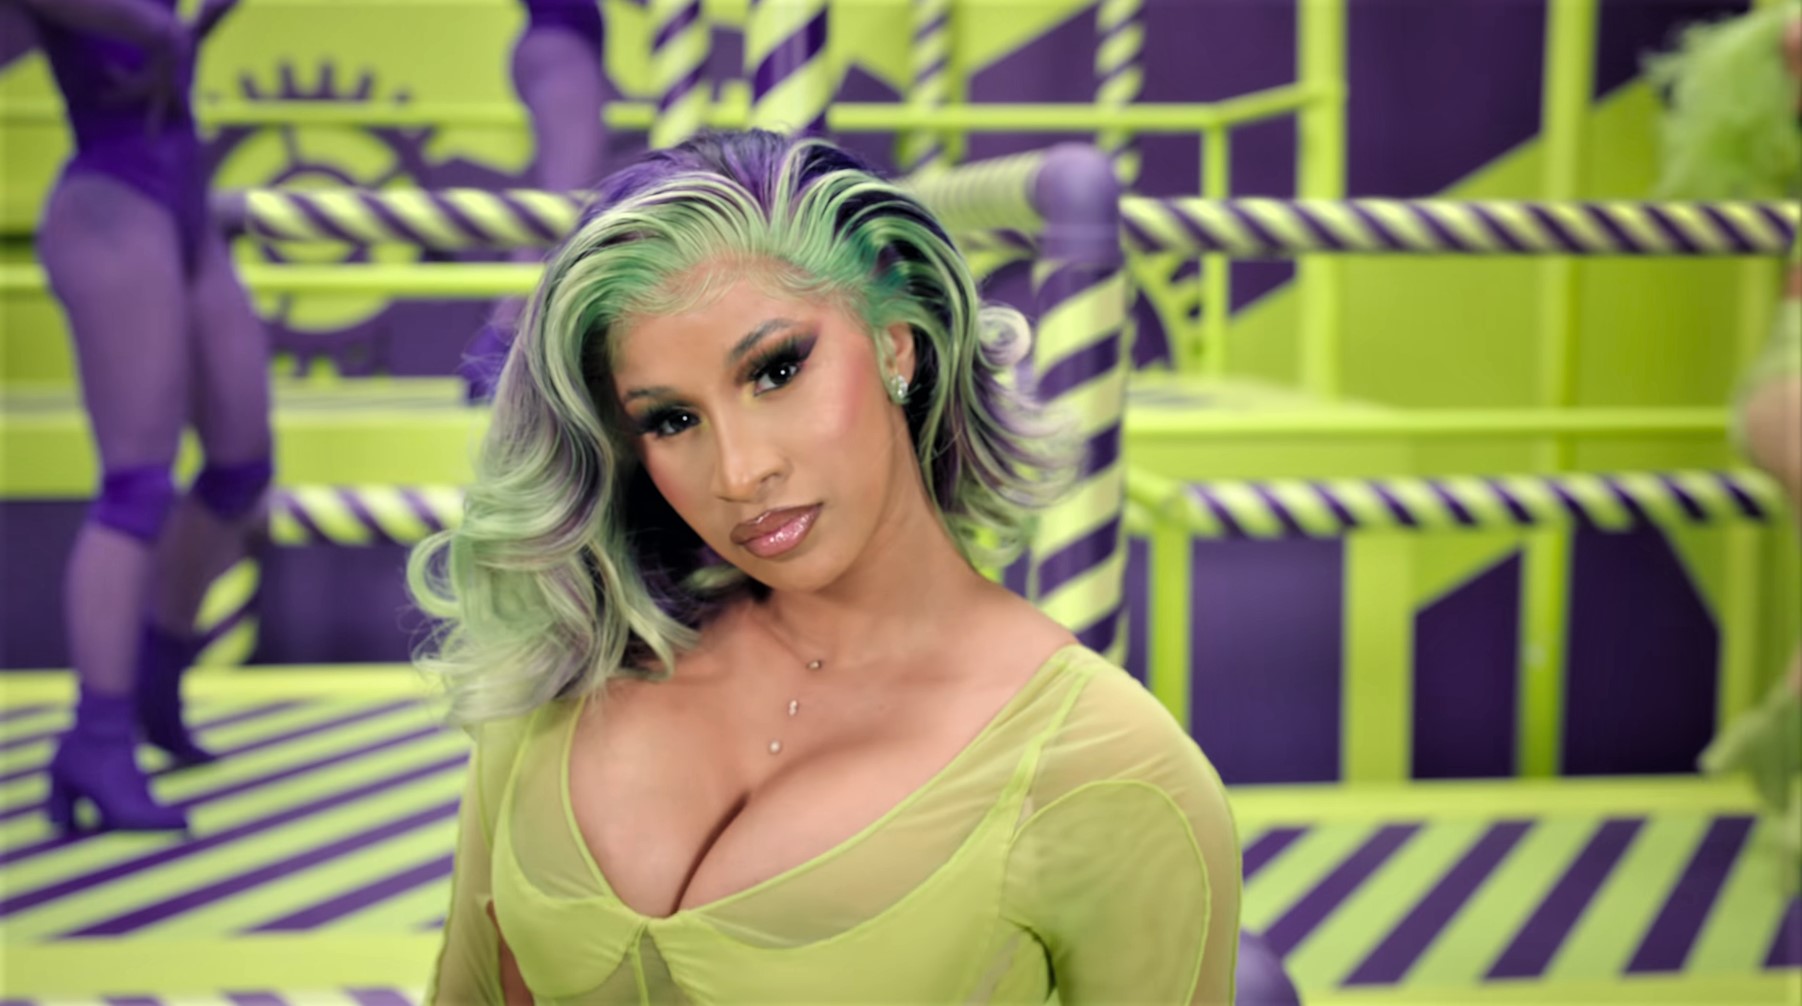 Cardi B, Bella Thorne, Blac Chyna and Other Celebs Are Making Insane Money ...